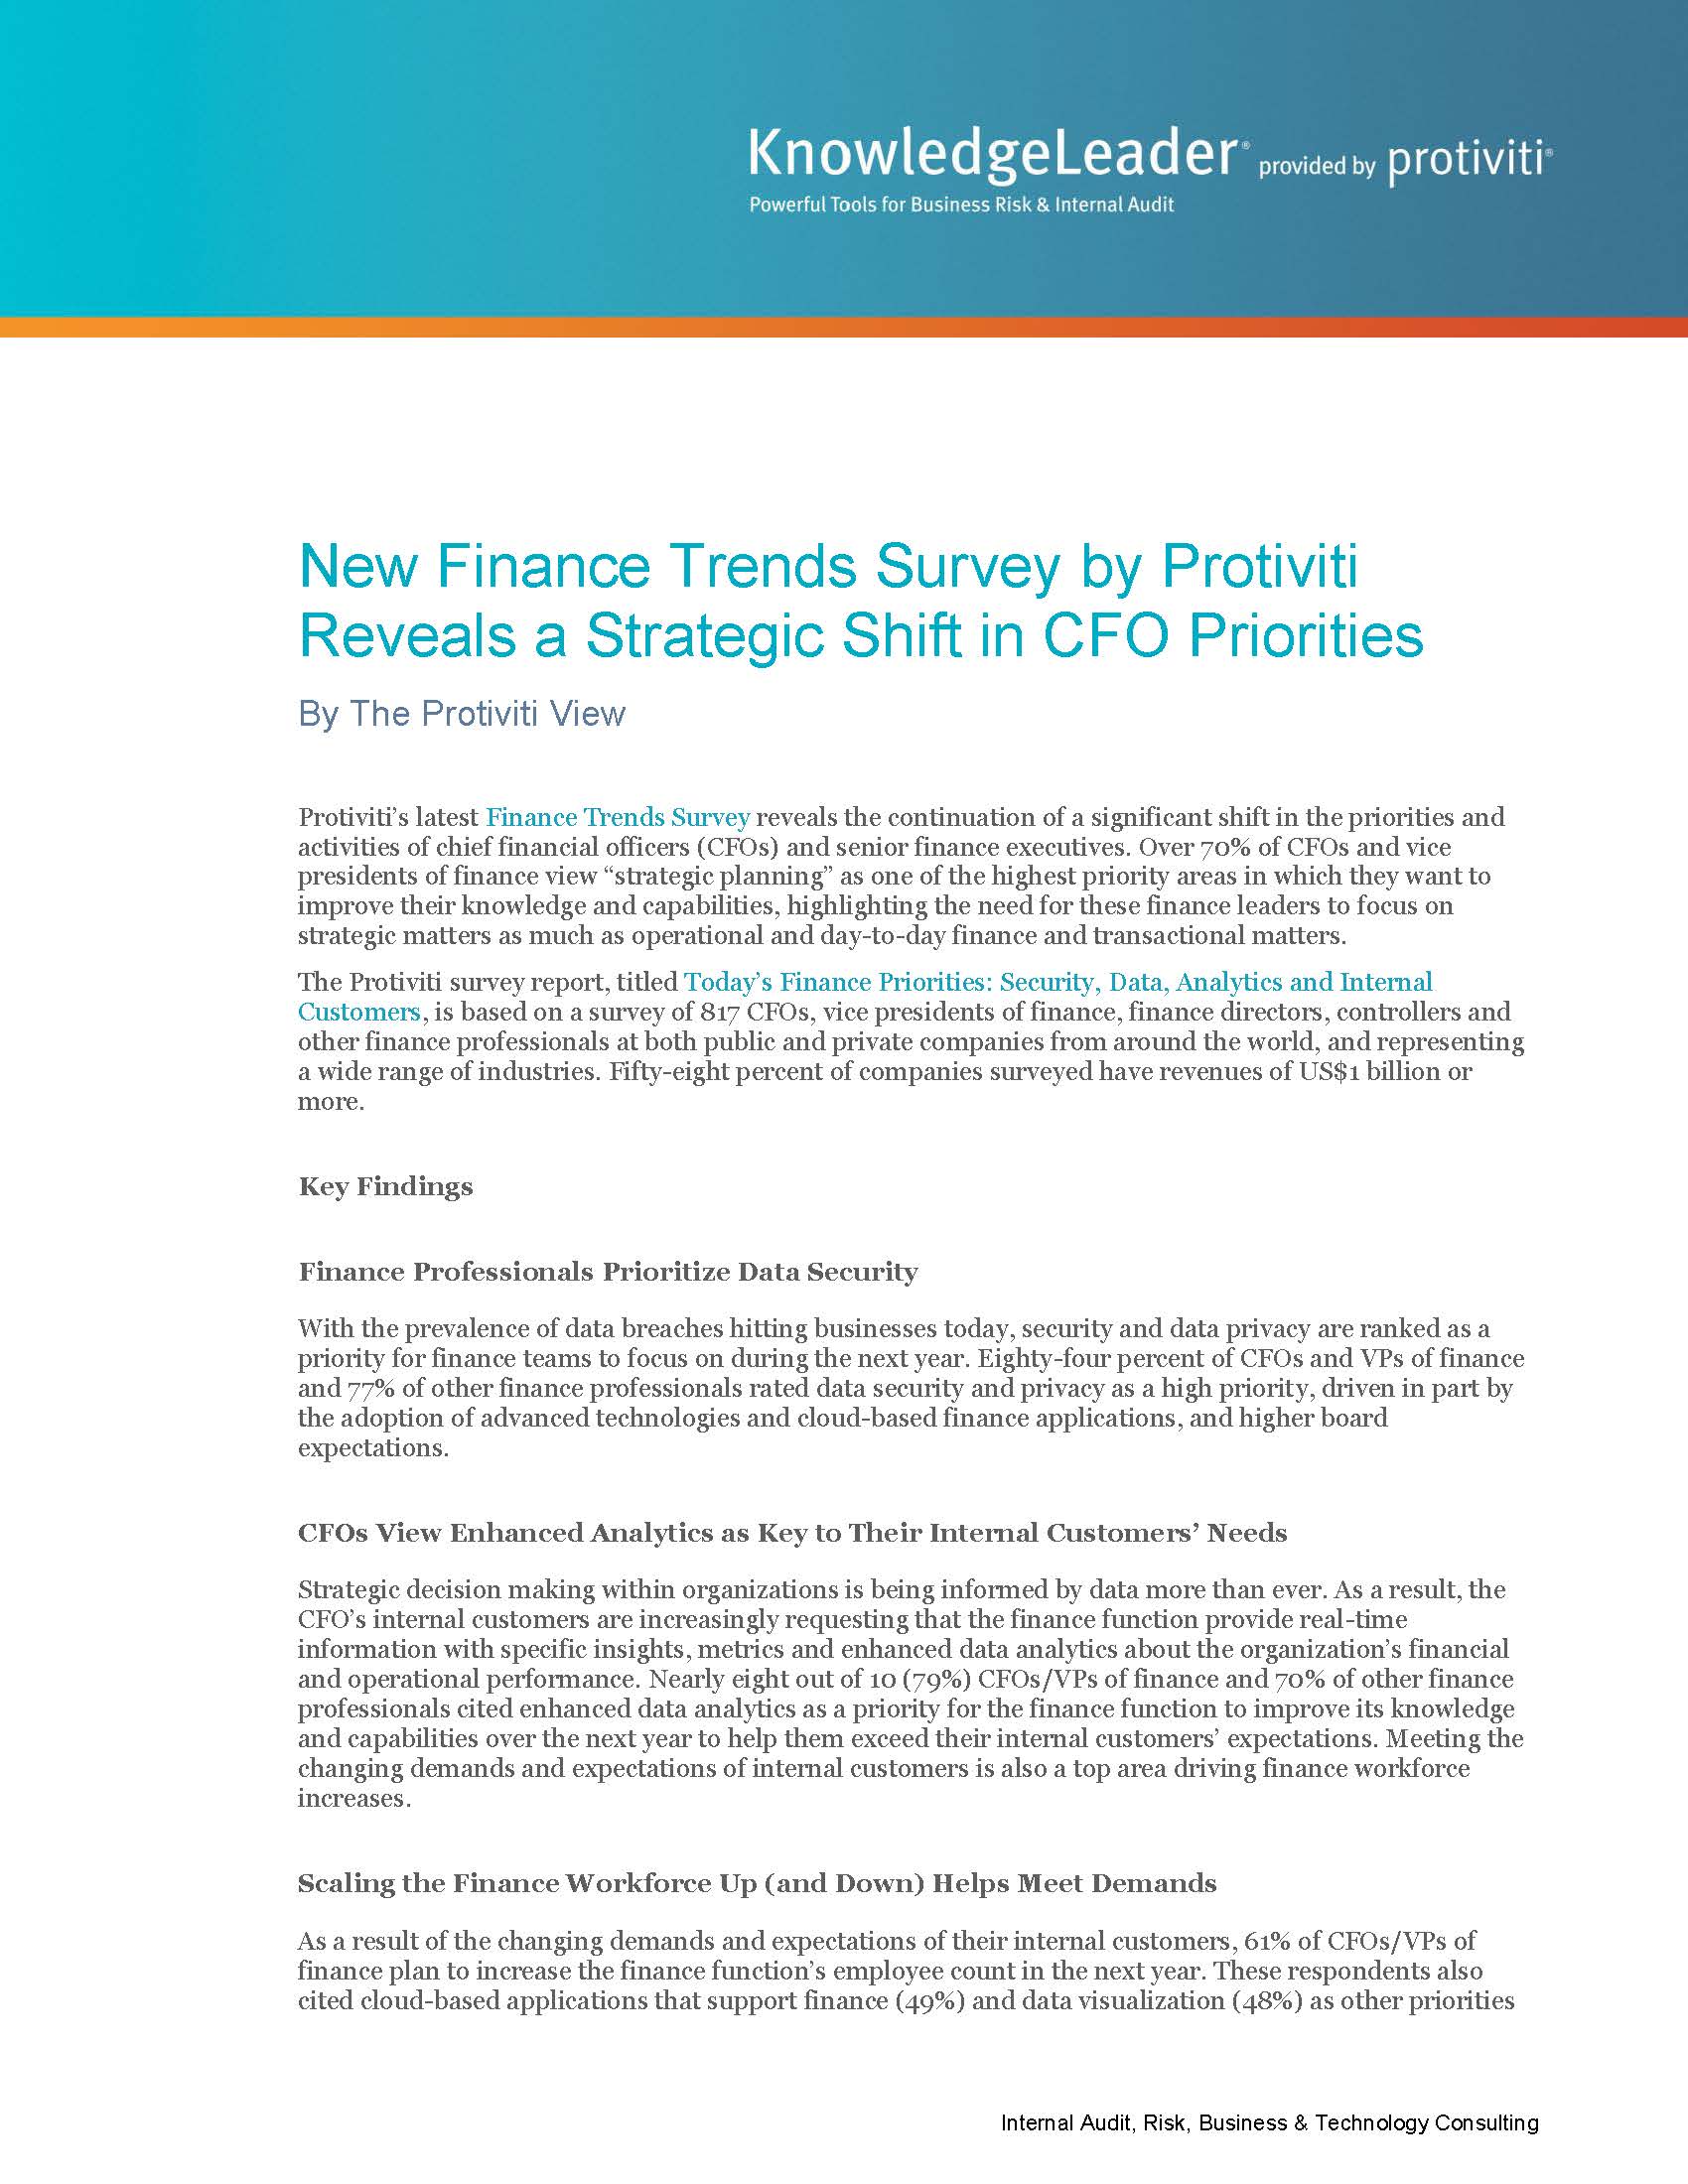 Screenshot of the first page of New Finance Trends Survey by Protiviti Reveals a Strategic Shift in CFO Priorities